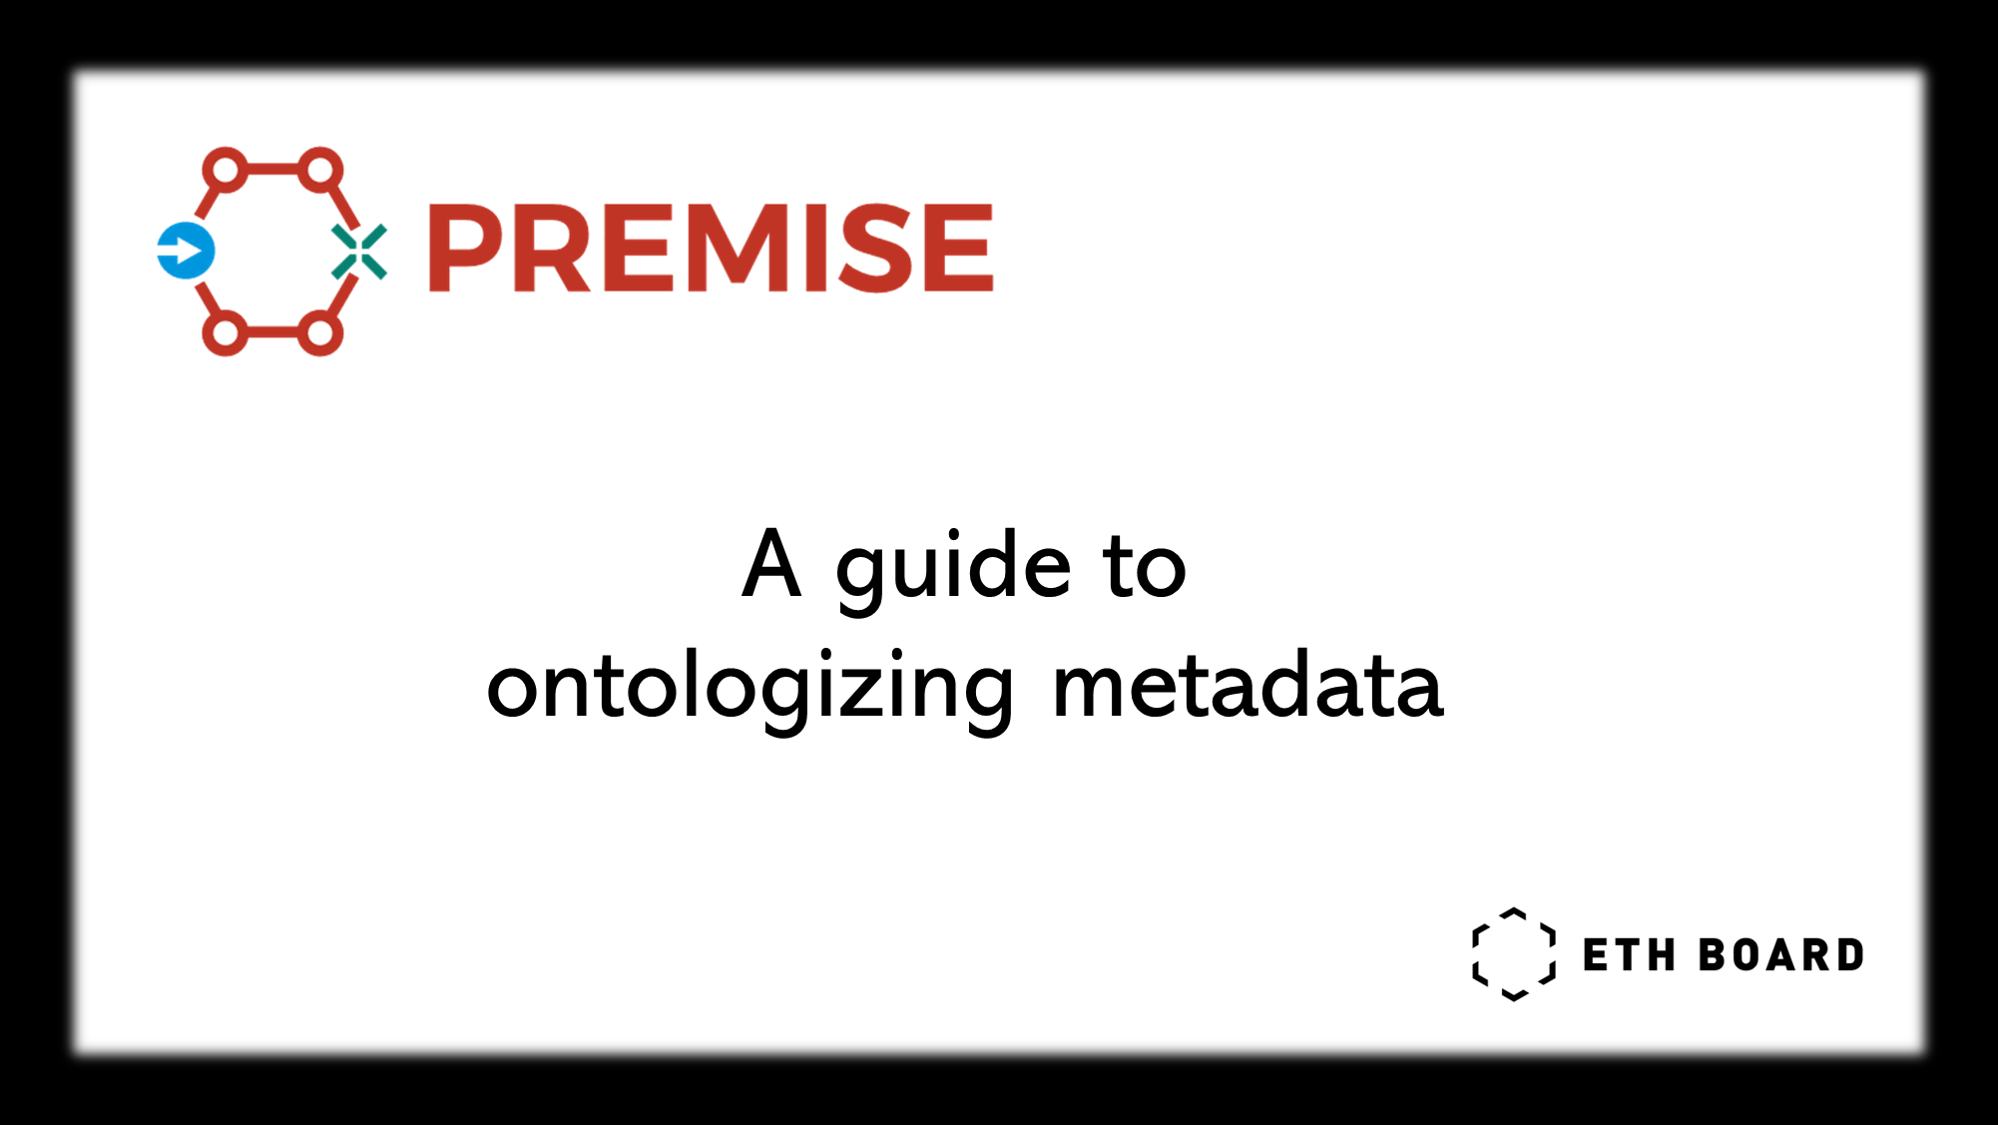 A guide to ontologizing metadata